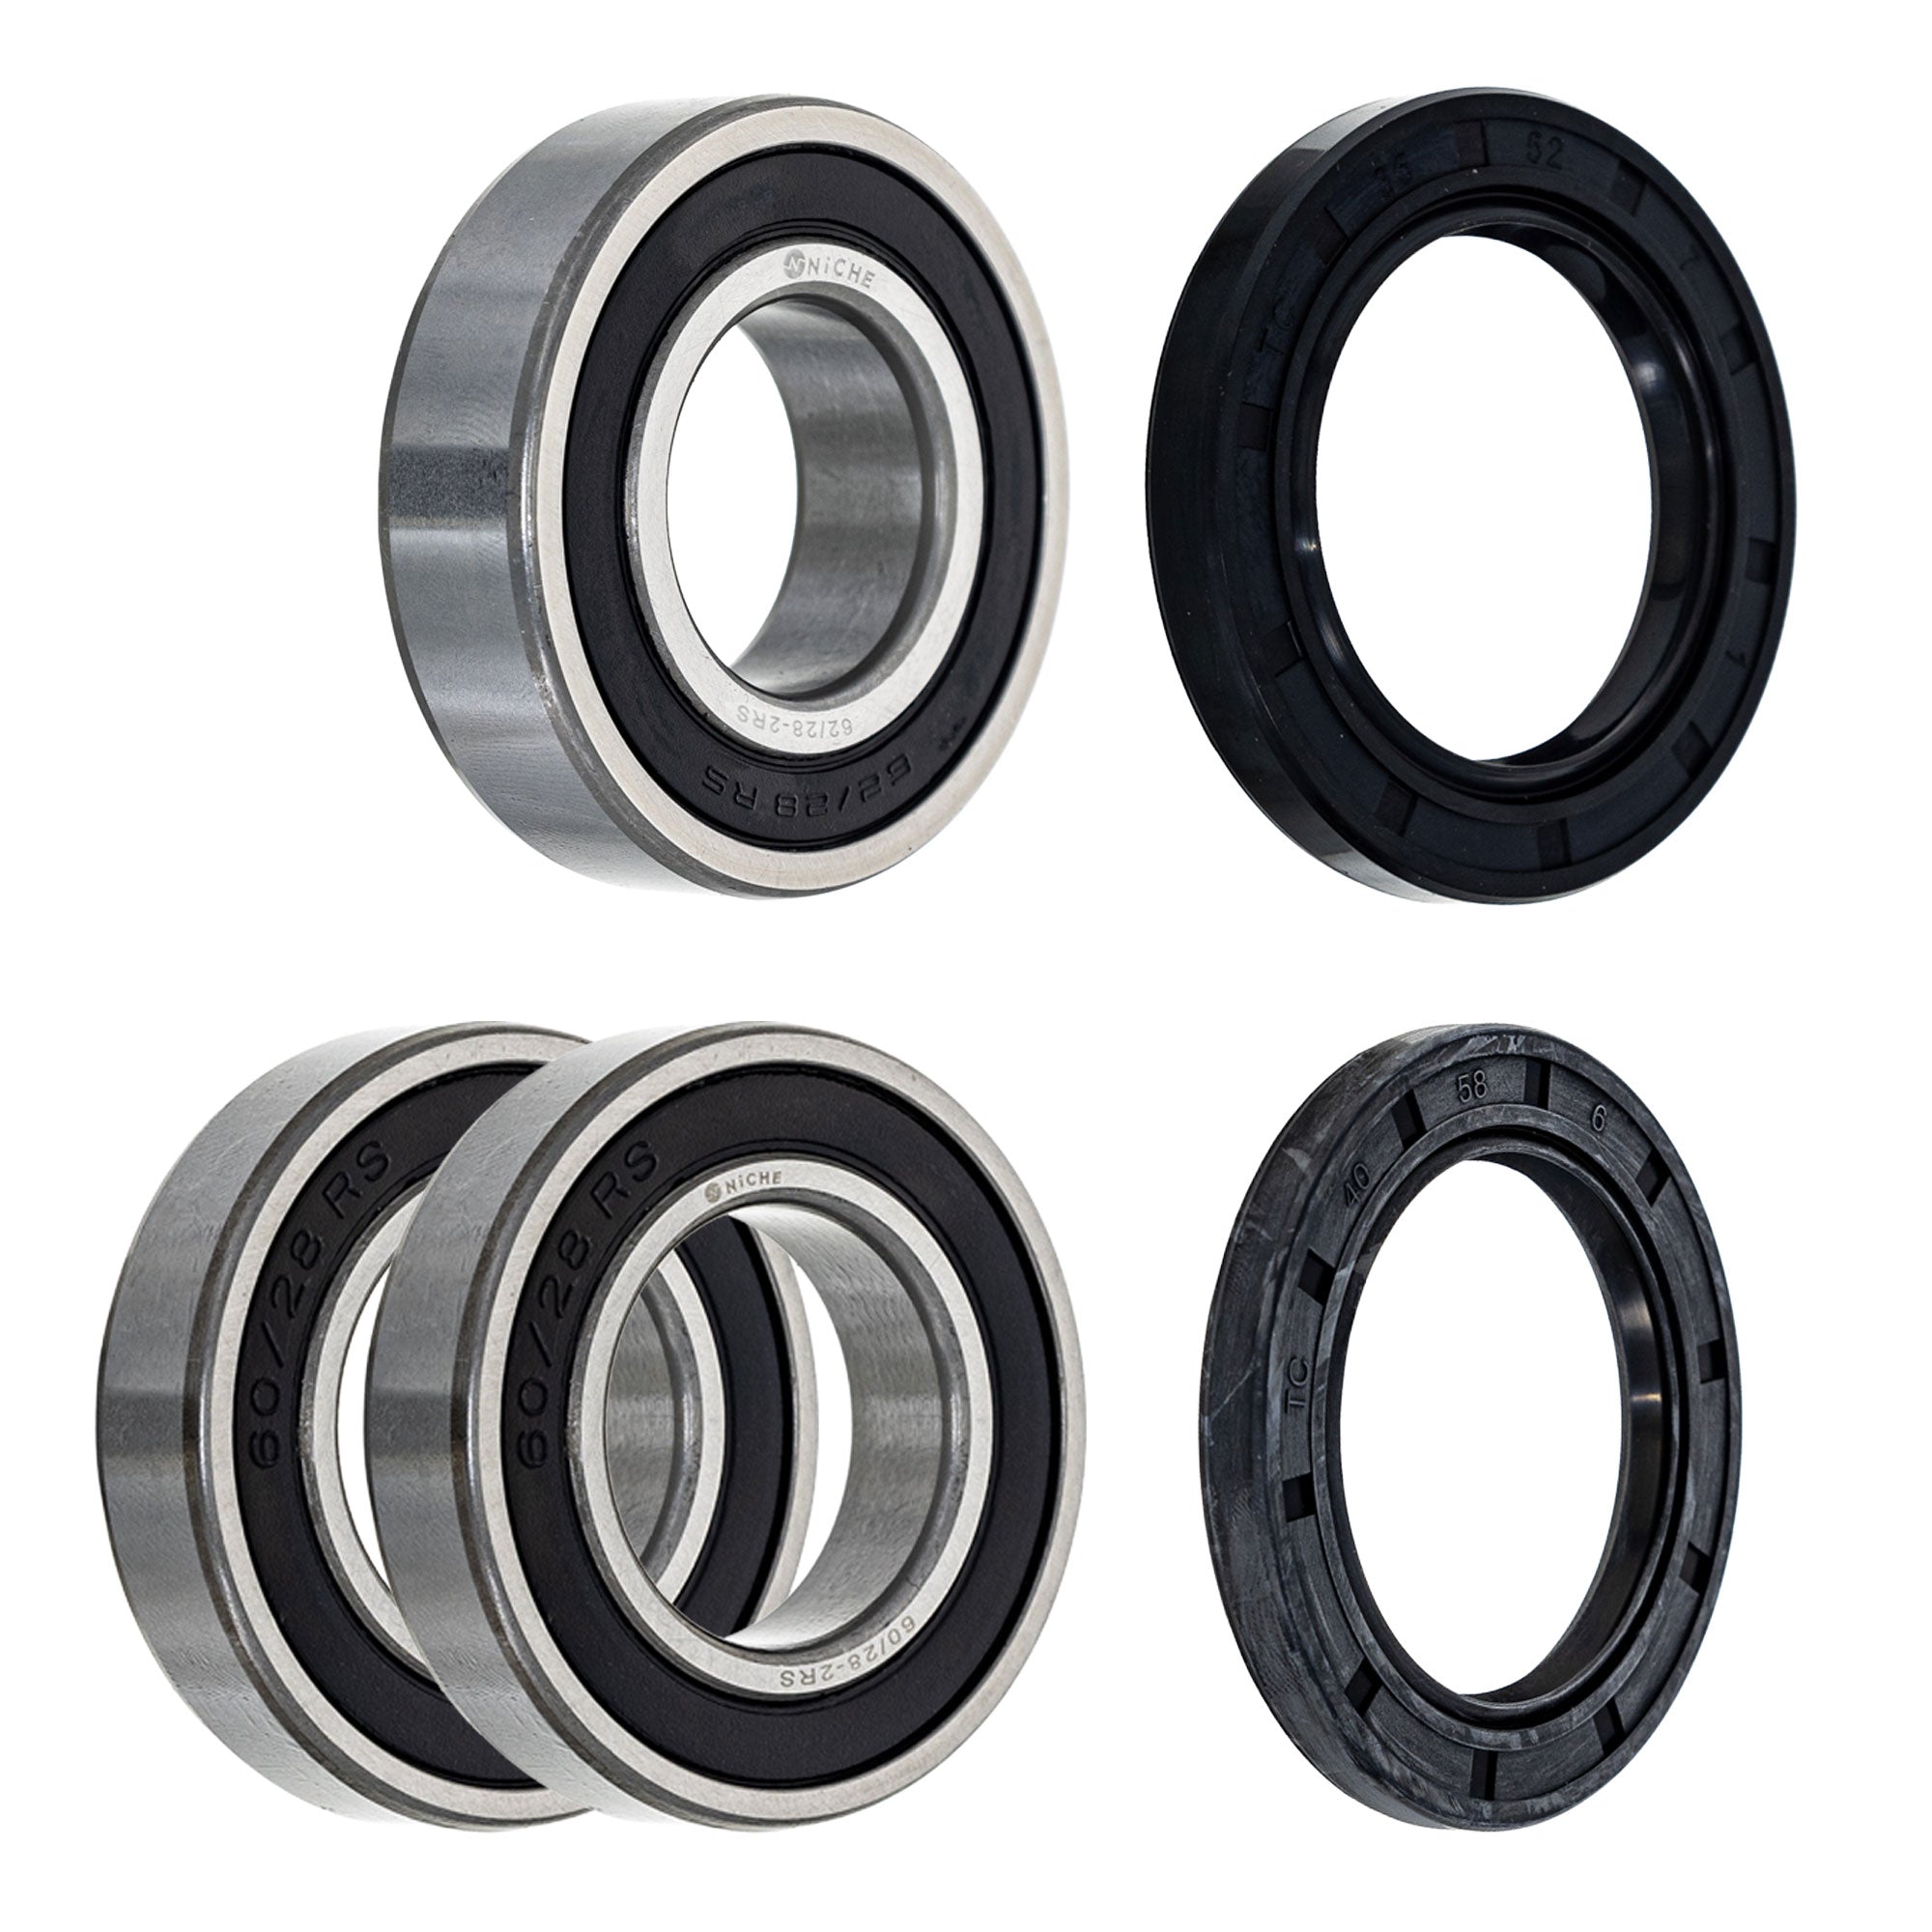 Wheel Bearing Seal Kit for zOTHER S1000XR S1000RR S1000R HP4 NICHE MK1008907